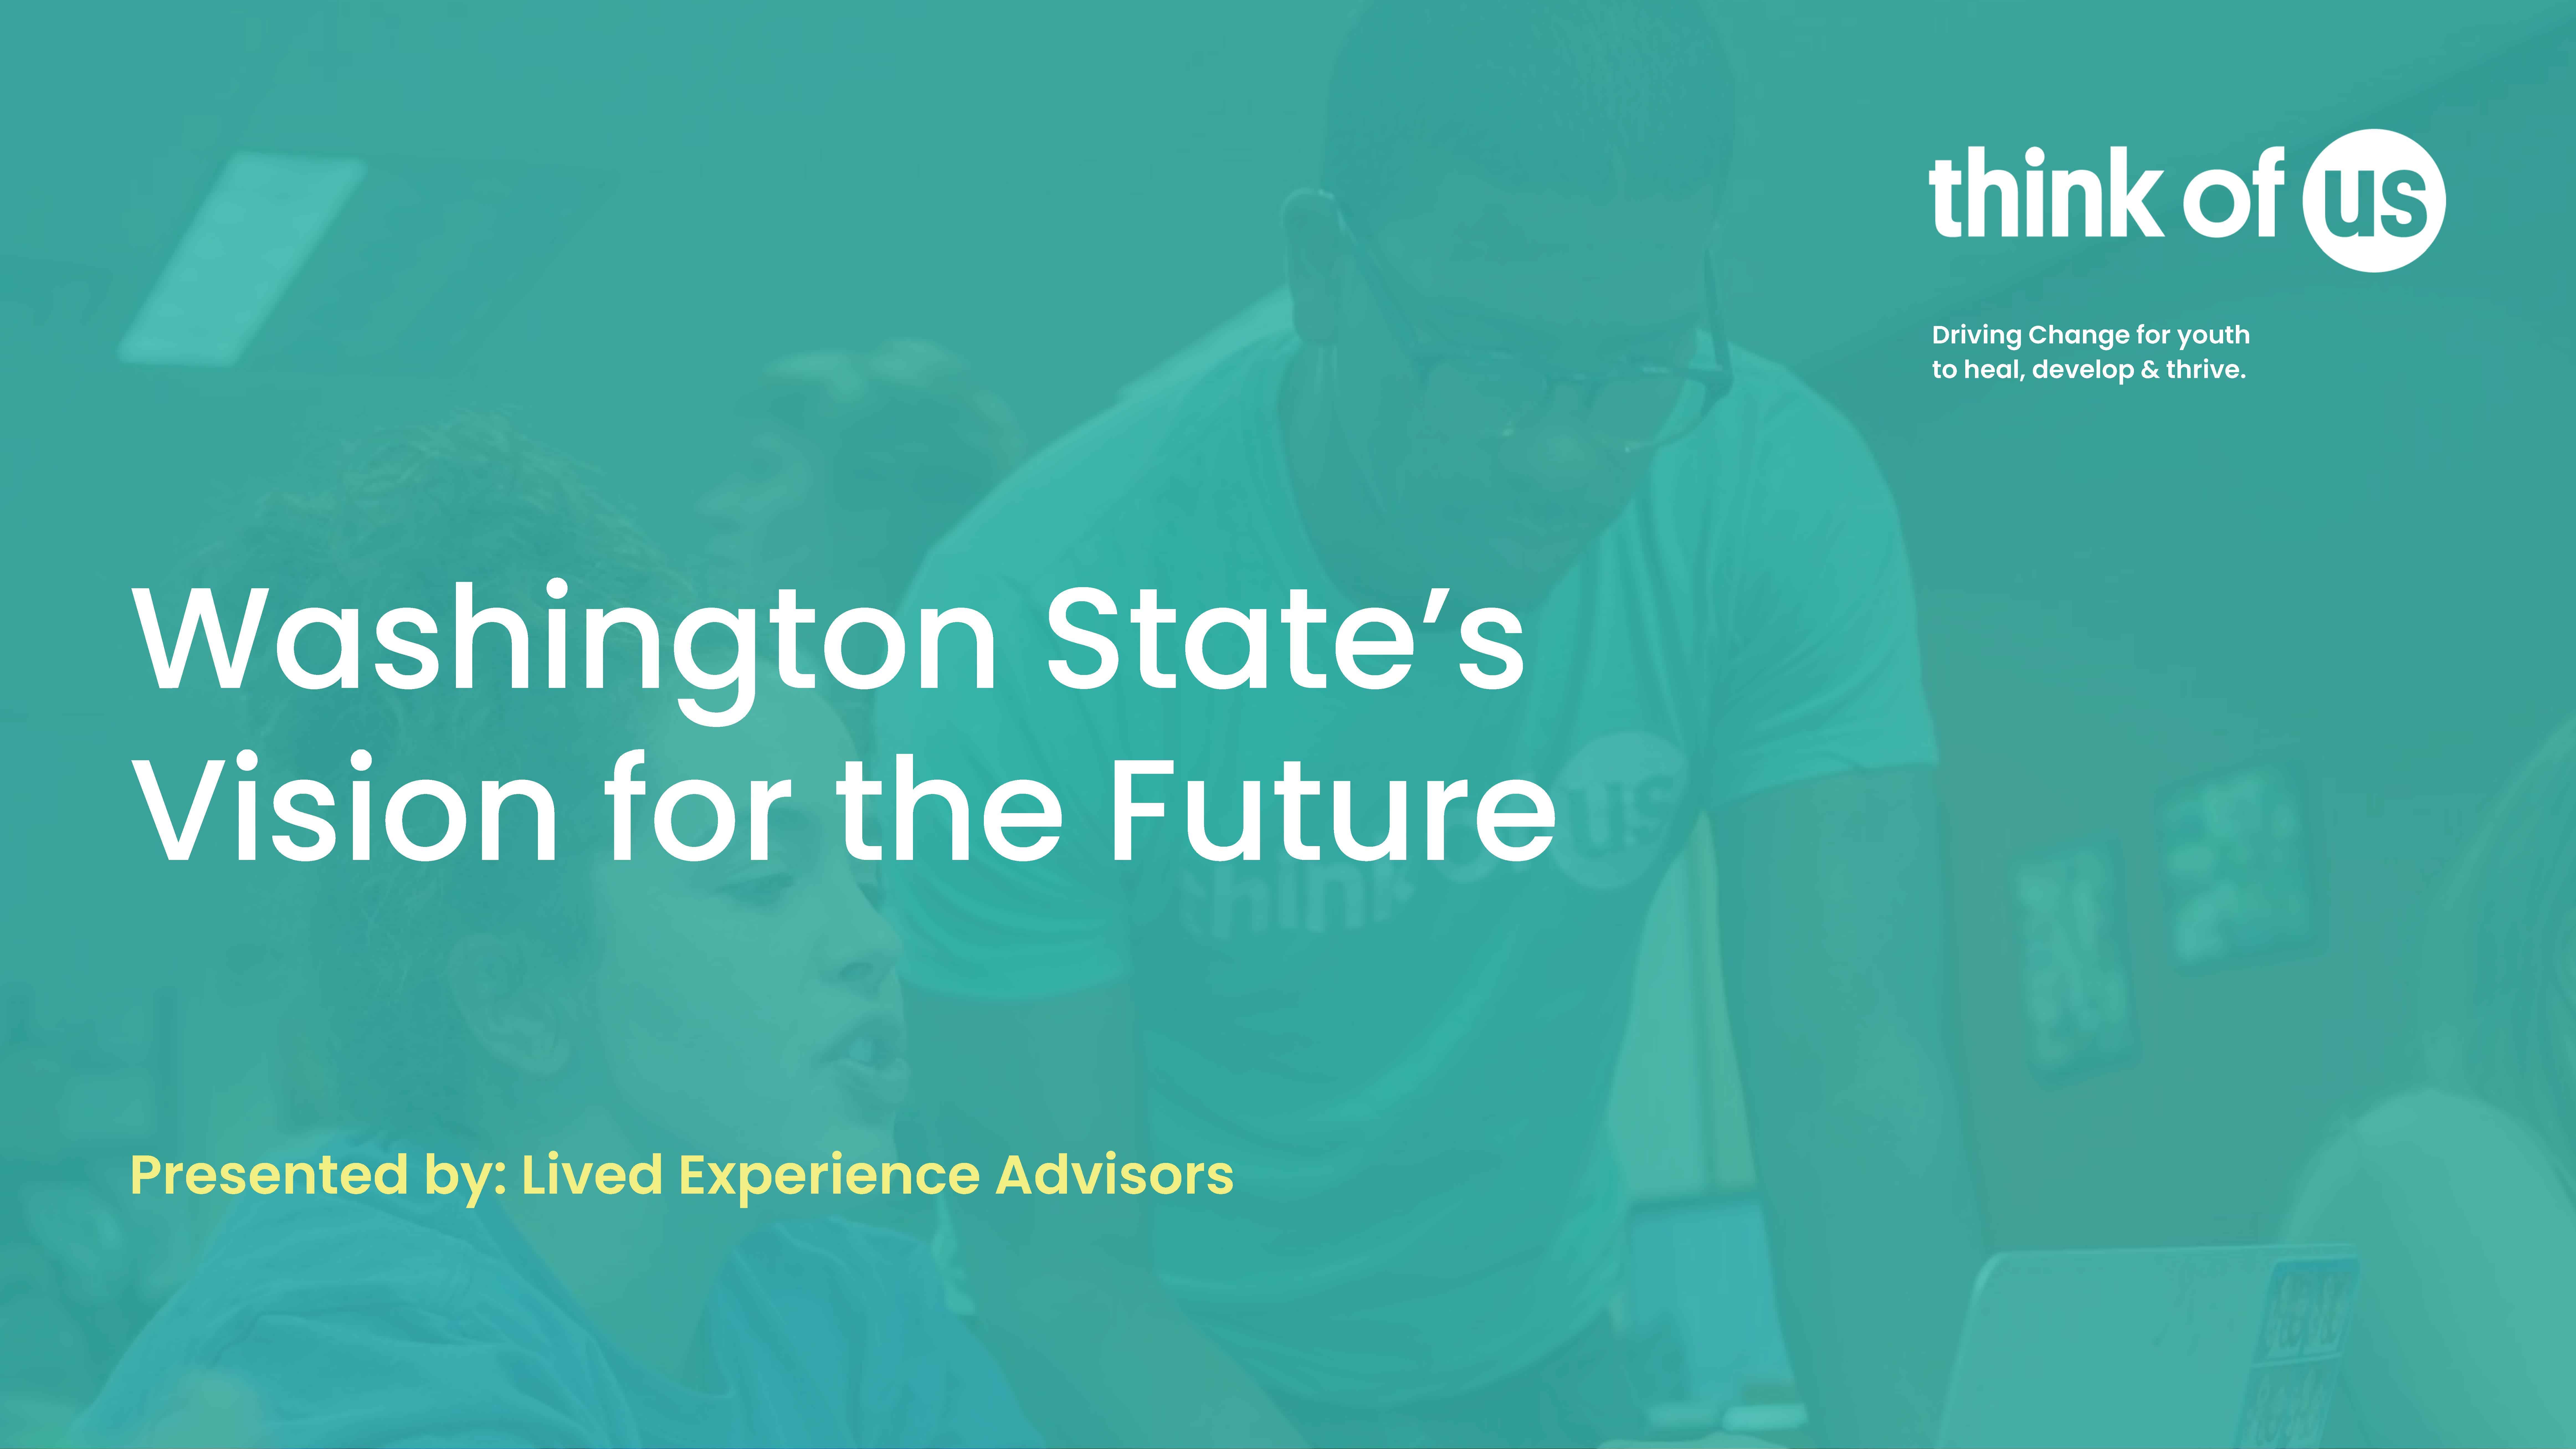 Text reads: Washington State's Vision for the Future. Think of Us logo is pictured in top right corner. In the background there is a faint image of 2 people working at a desk together